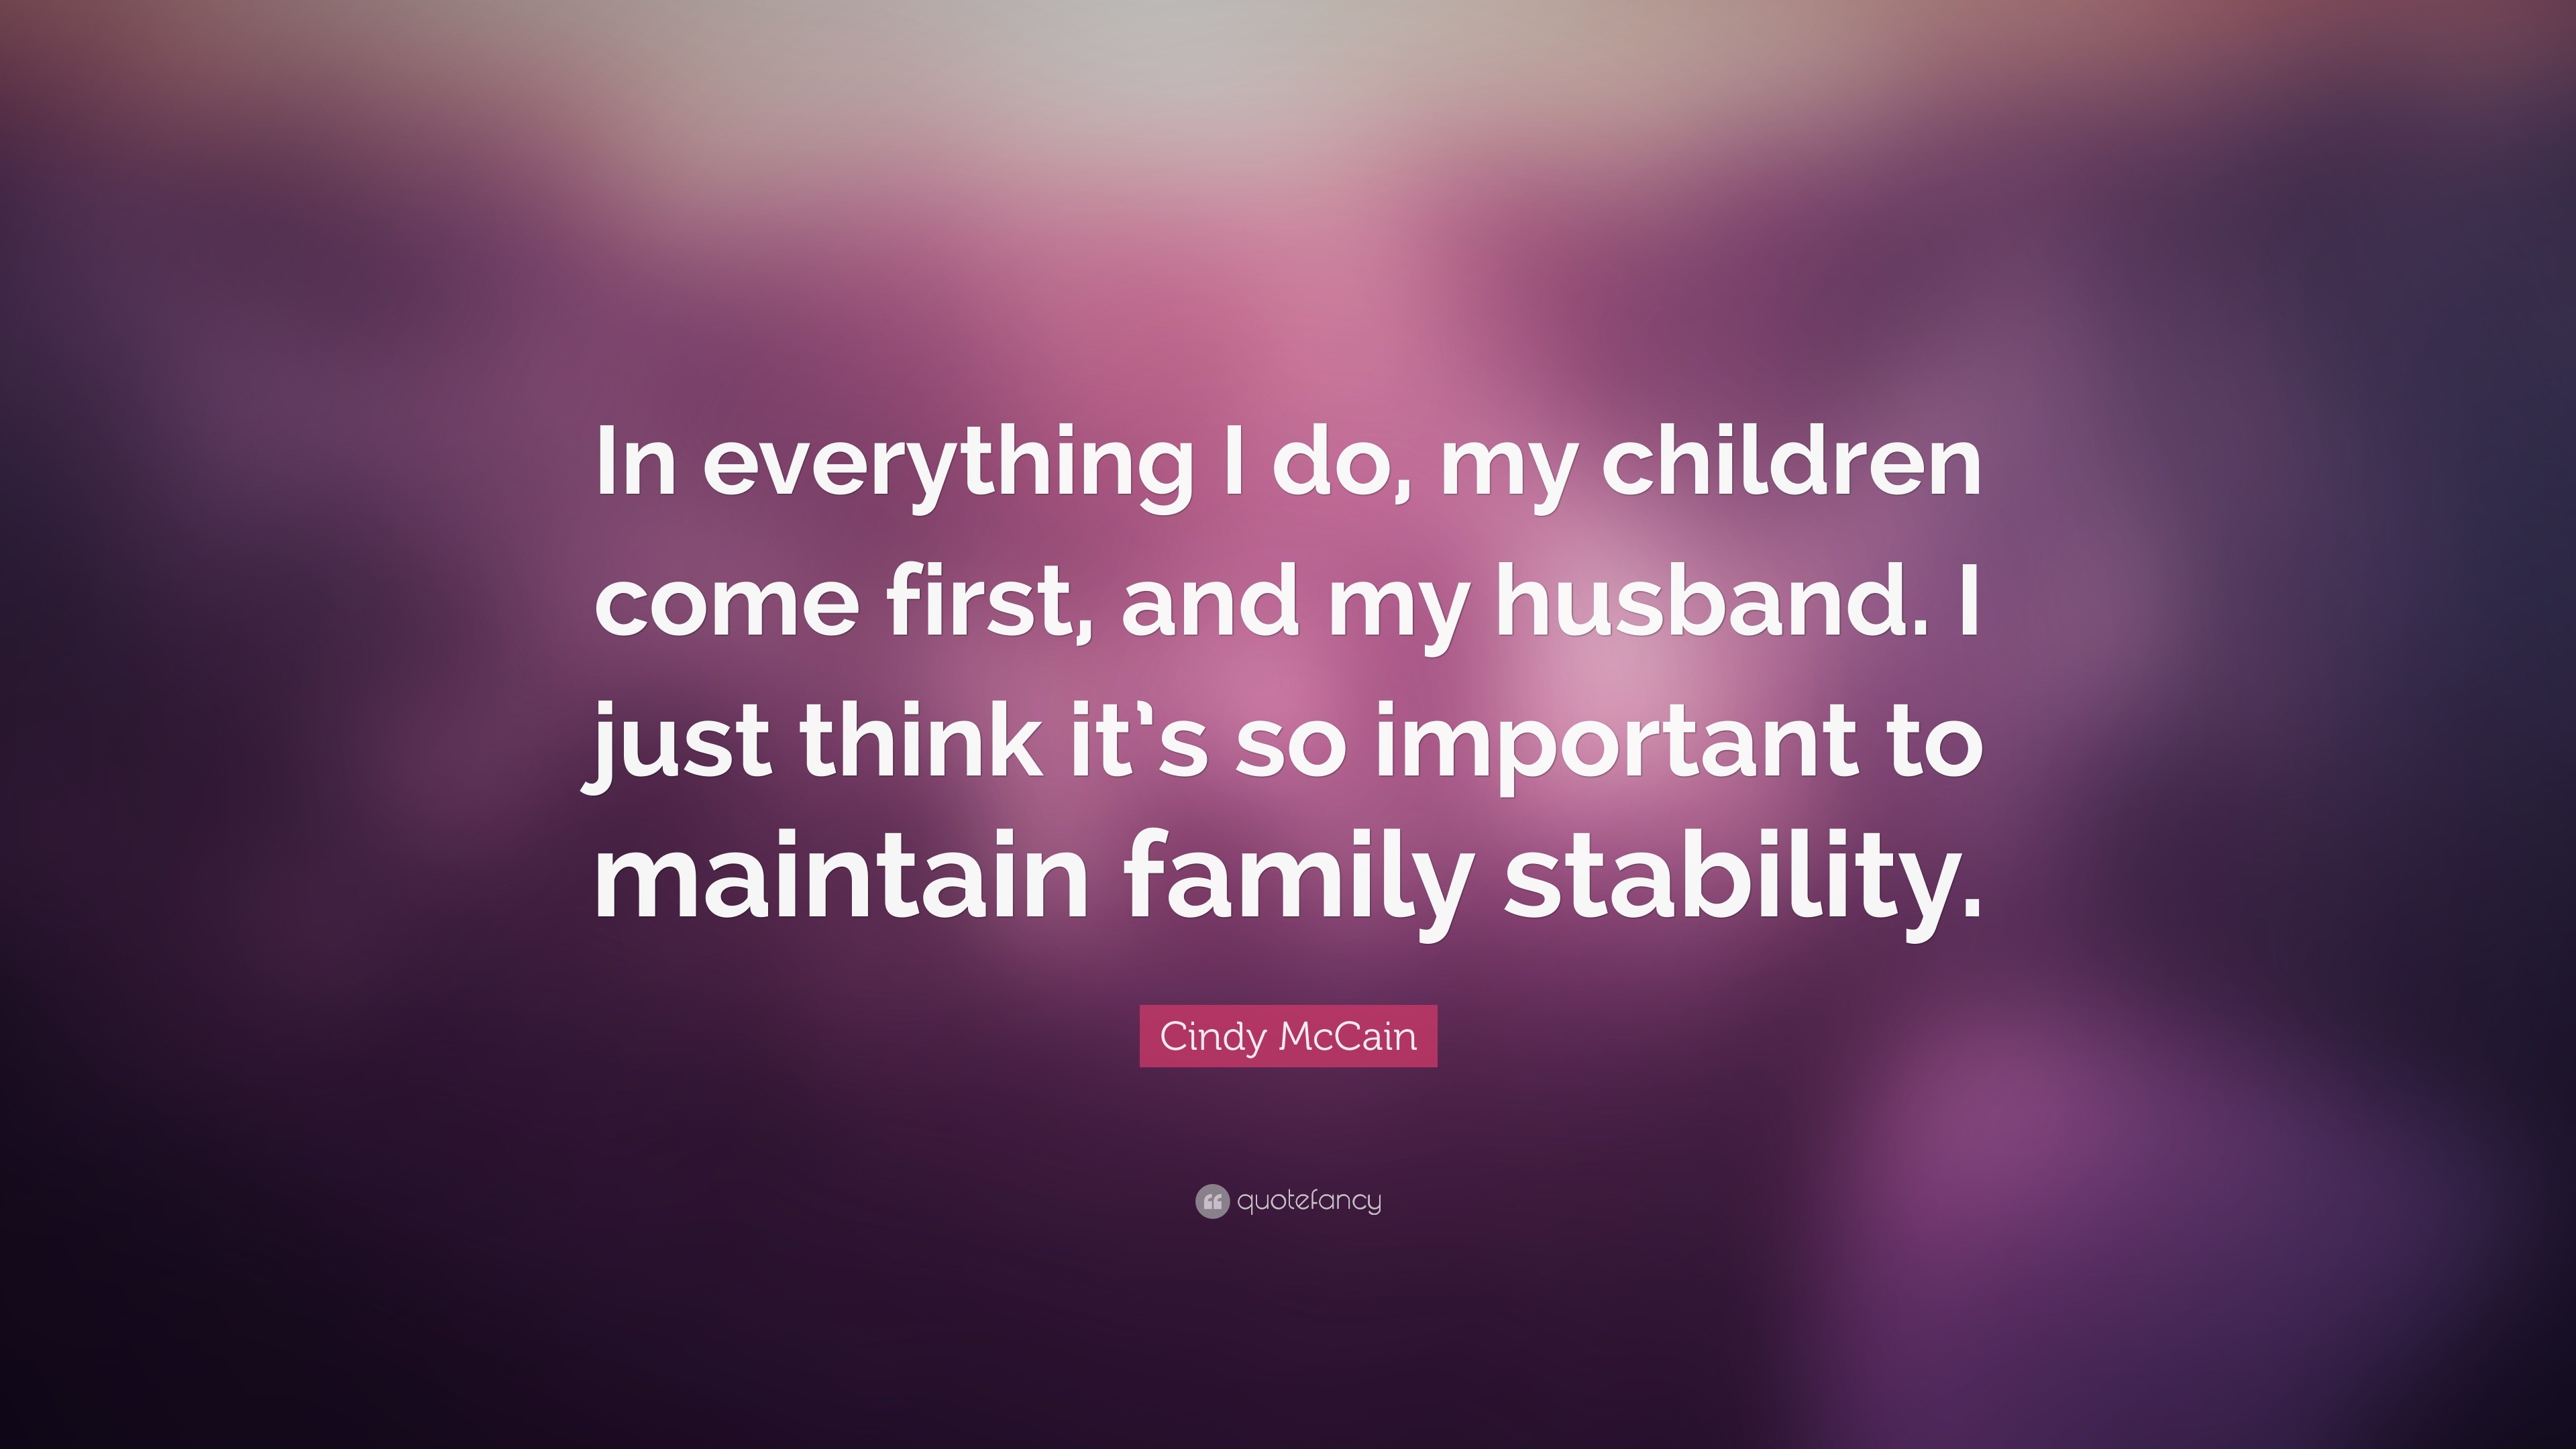 Cindy McCain Quote “In everything I do my children e first and